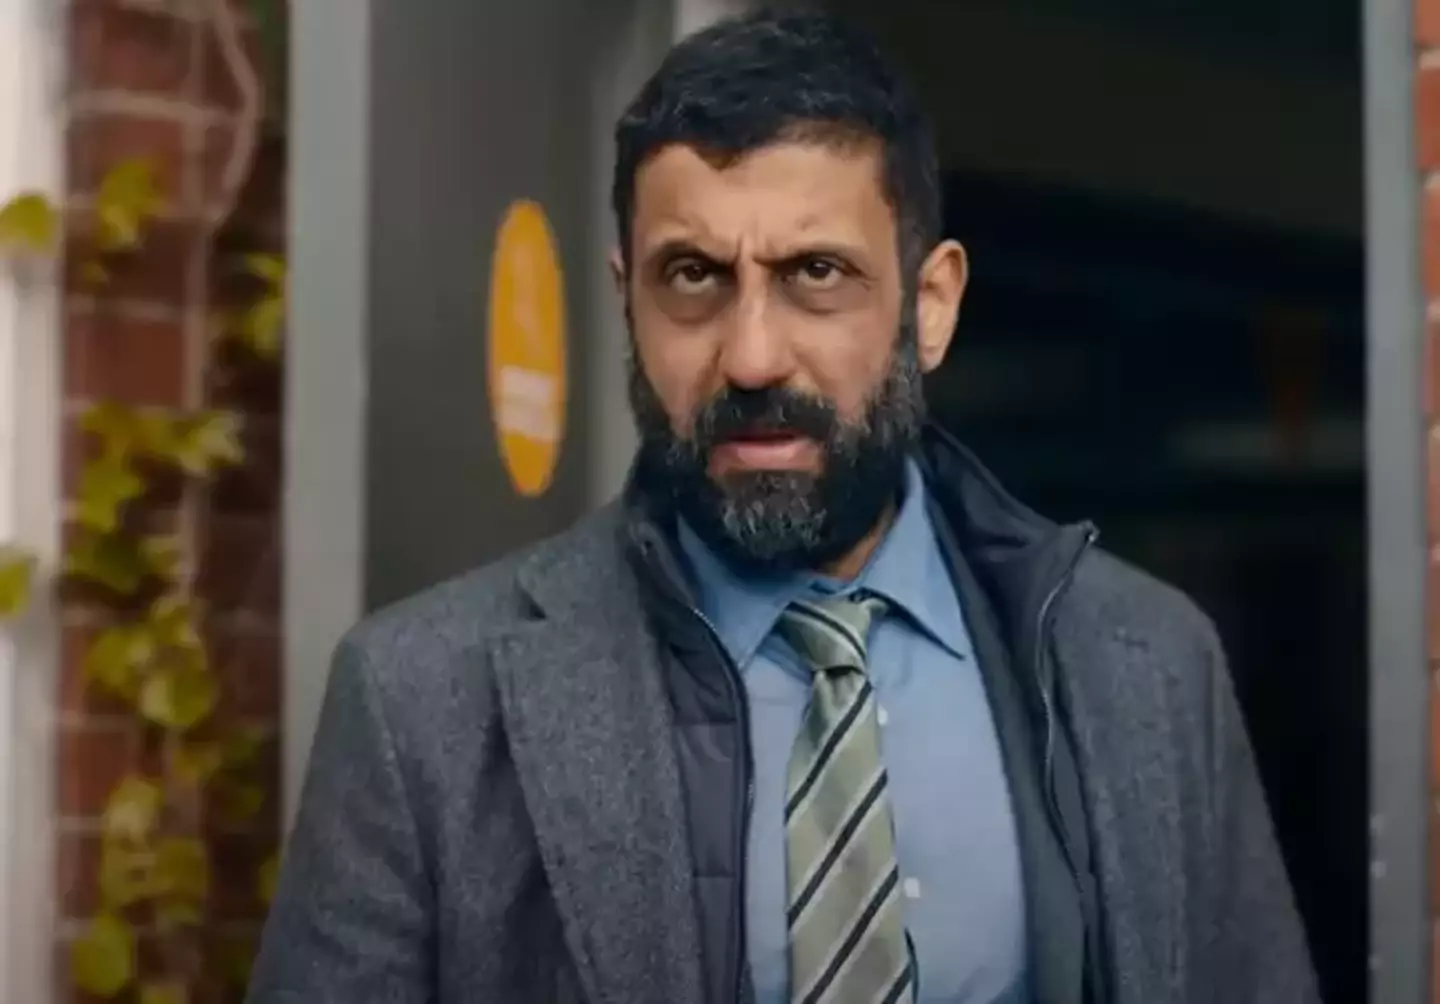 The author also revealed we could see more of Adeel Akhtar and his character DS Sami Kierce.